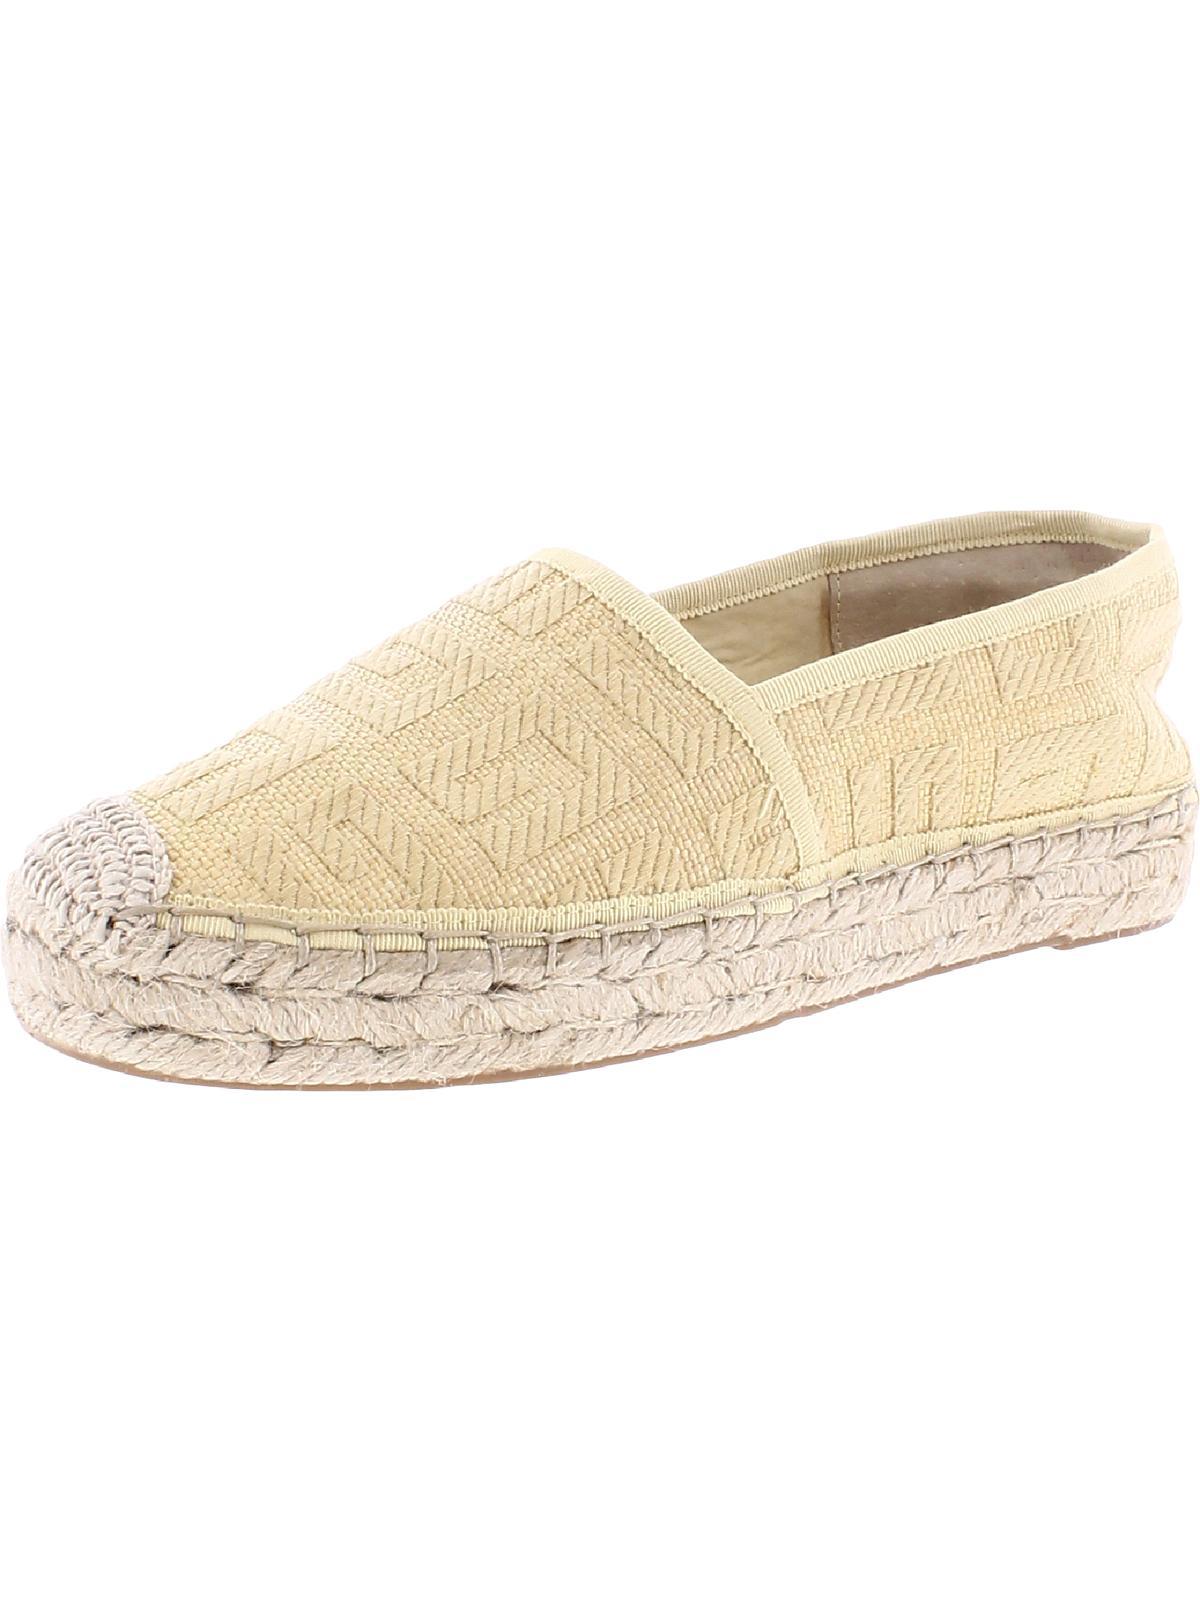 Guess Jessea Lifestyle Slip On Fashion Loafers in Natural | Lyst